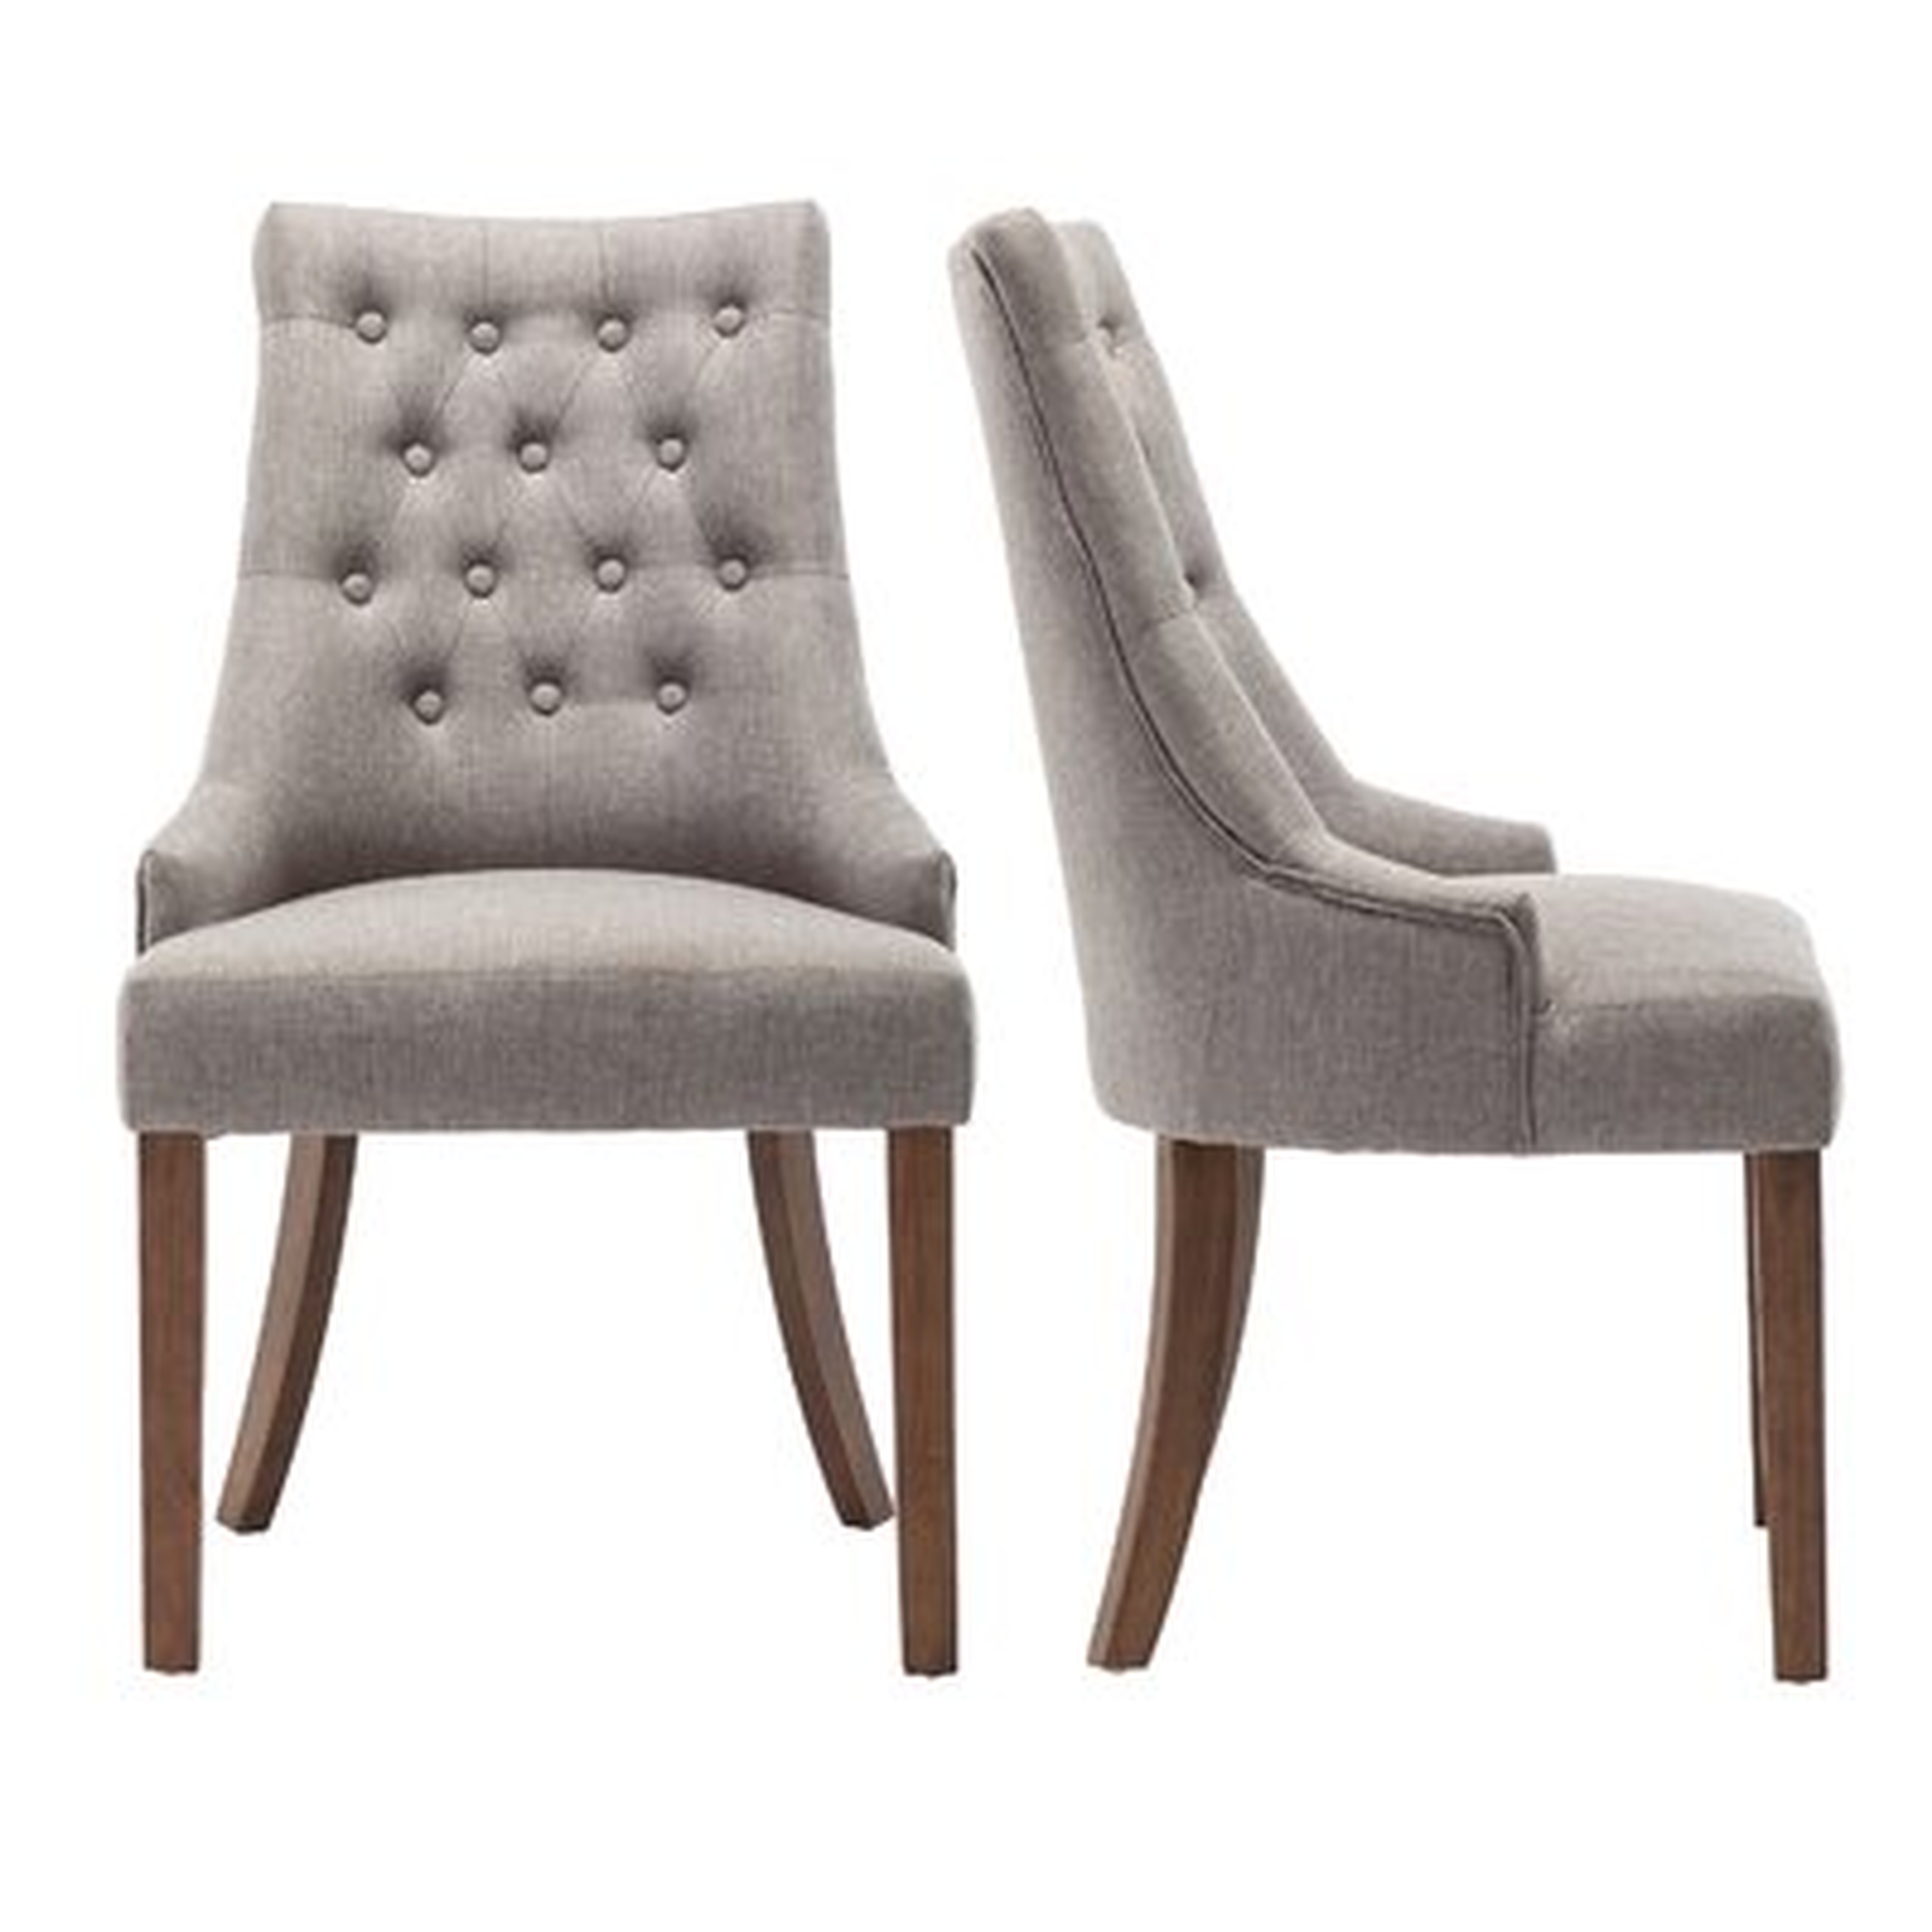 PARSONS DINING CHAIR Modern Elegant Button-Tufted Upholstered Fabric, Set Of 2 - Wayfair